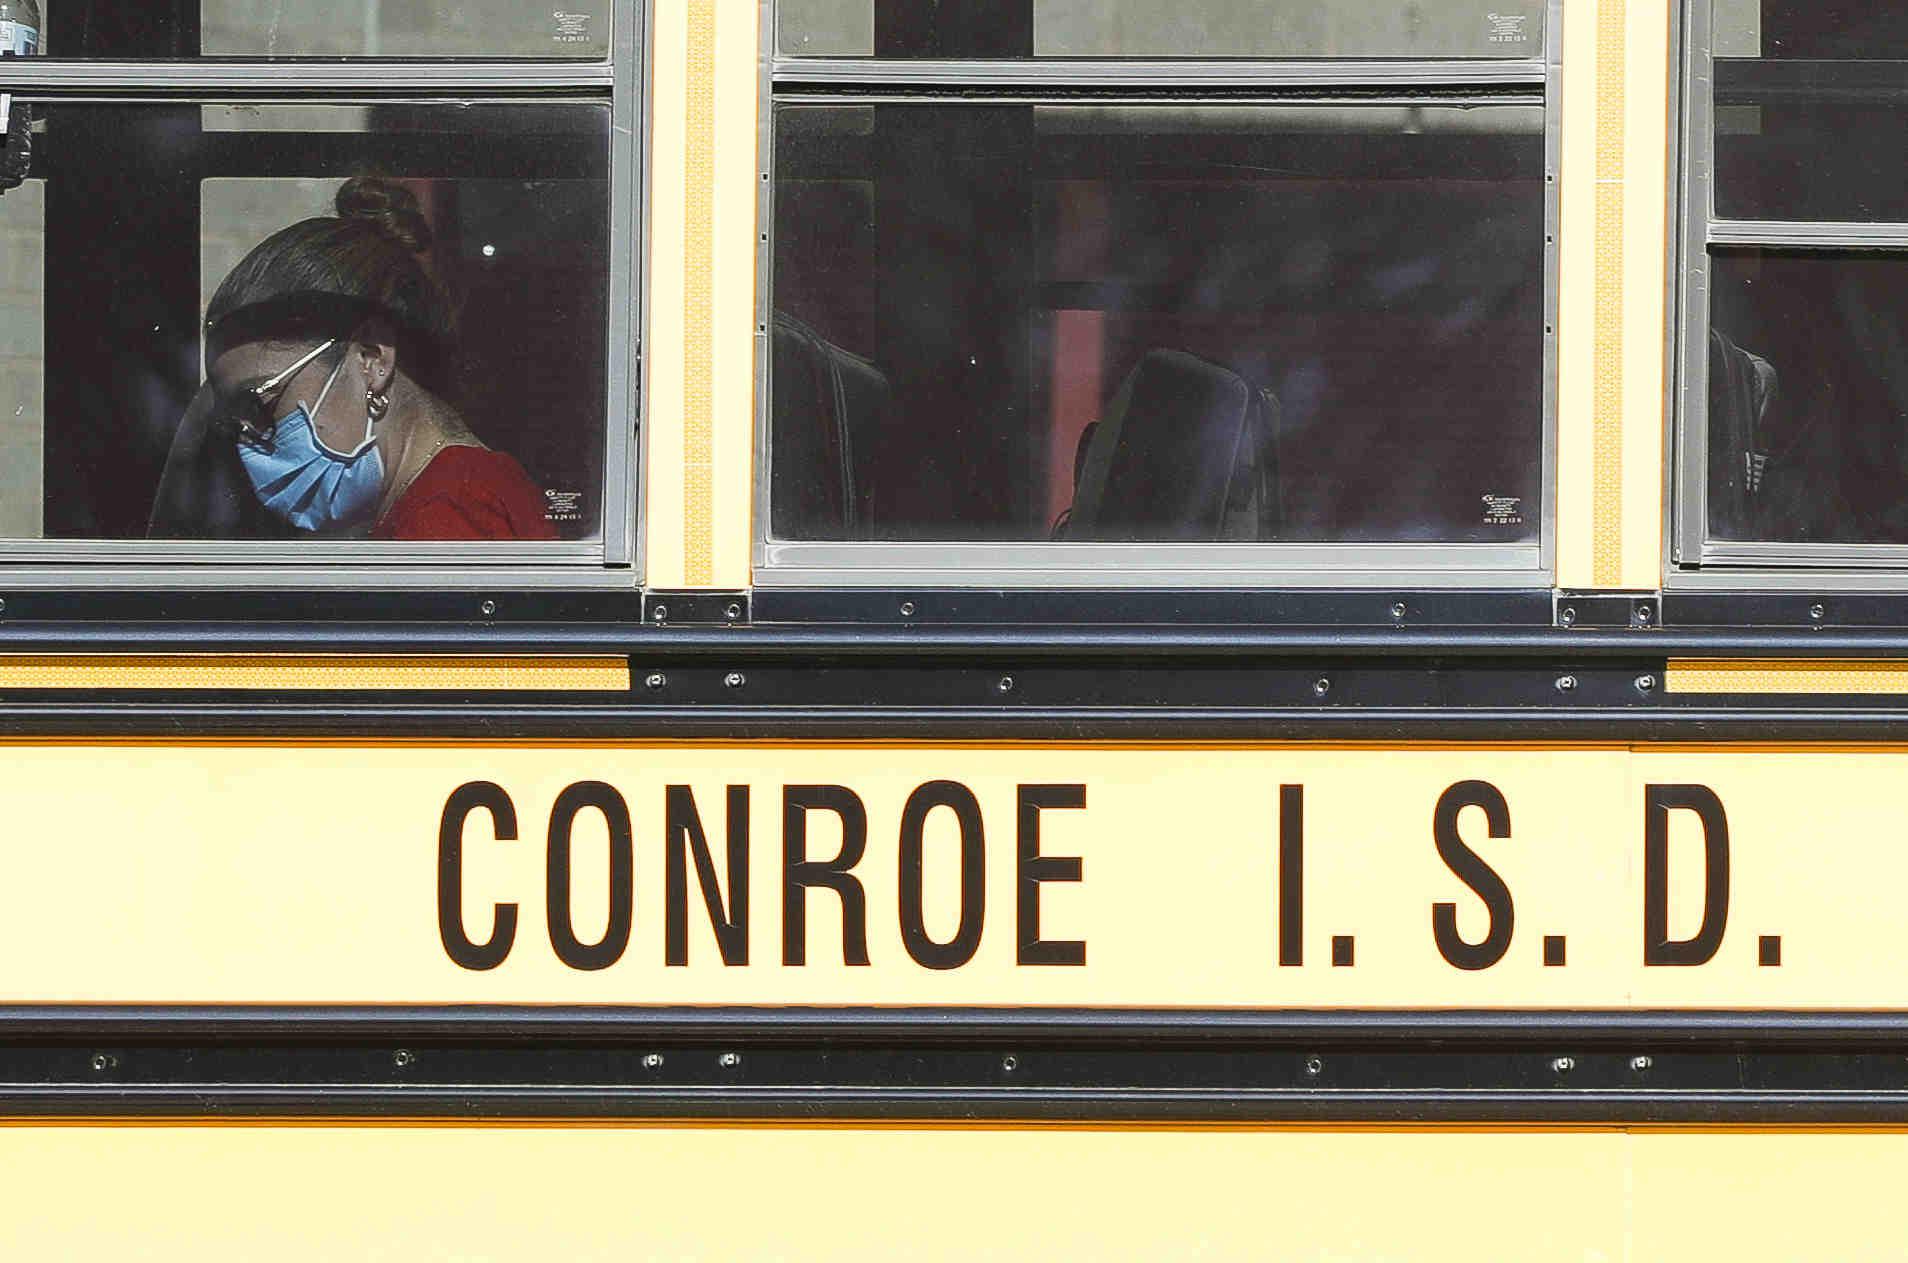 Conroe Isd Calendar 2022 Conroe Isd Approves Its 2022-23 School Calendar With Aug. 10 Start Date